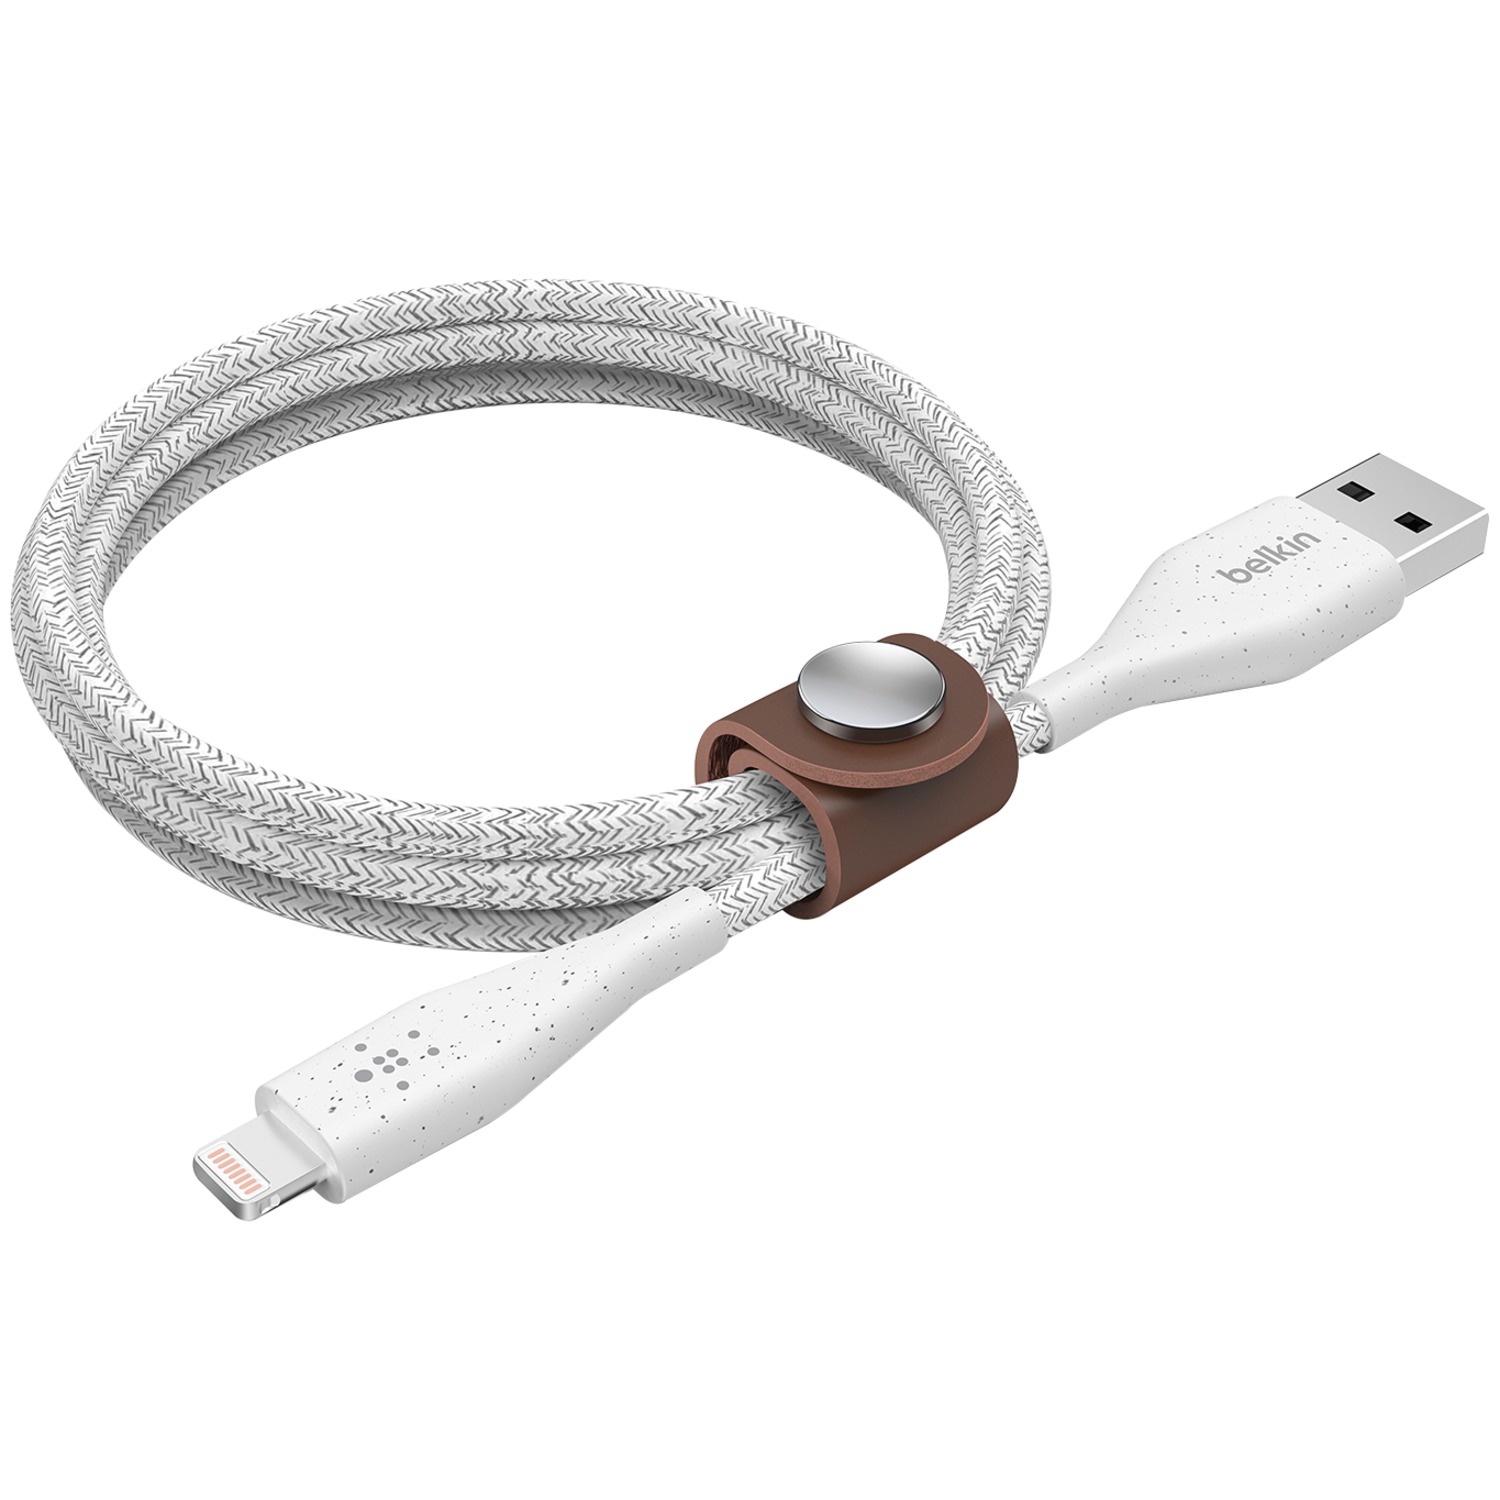 Belkin F8J236bt04-WHT DuraTek Plus Lightning to USB-A Cable, 4 Feet (White) - image 2 of 9